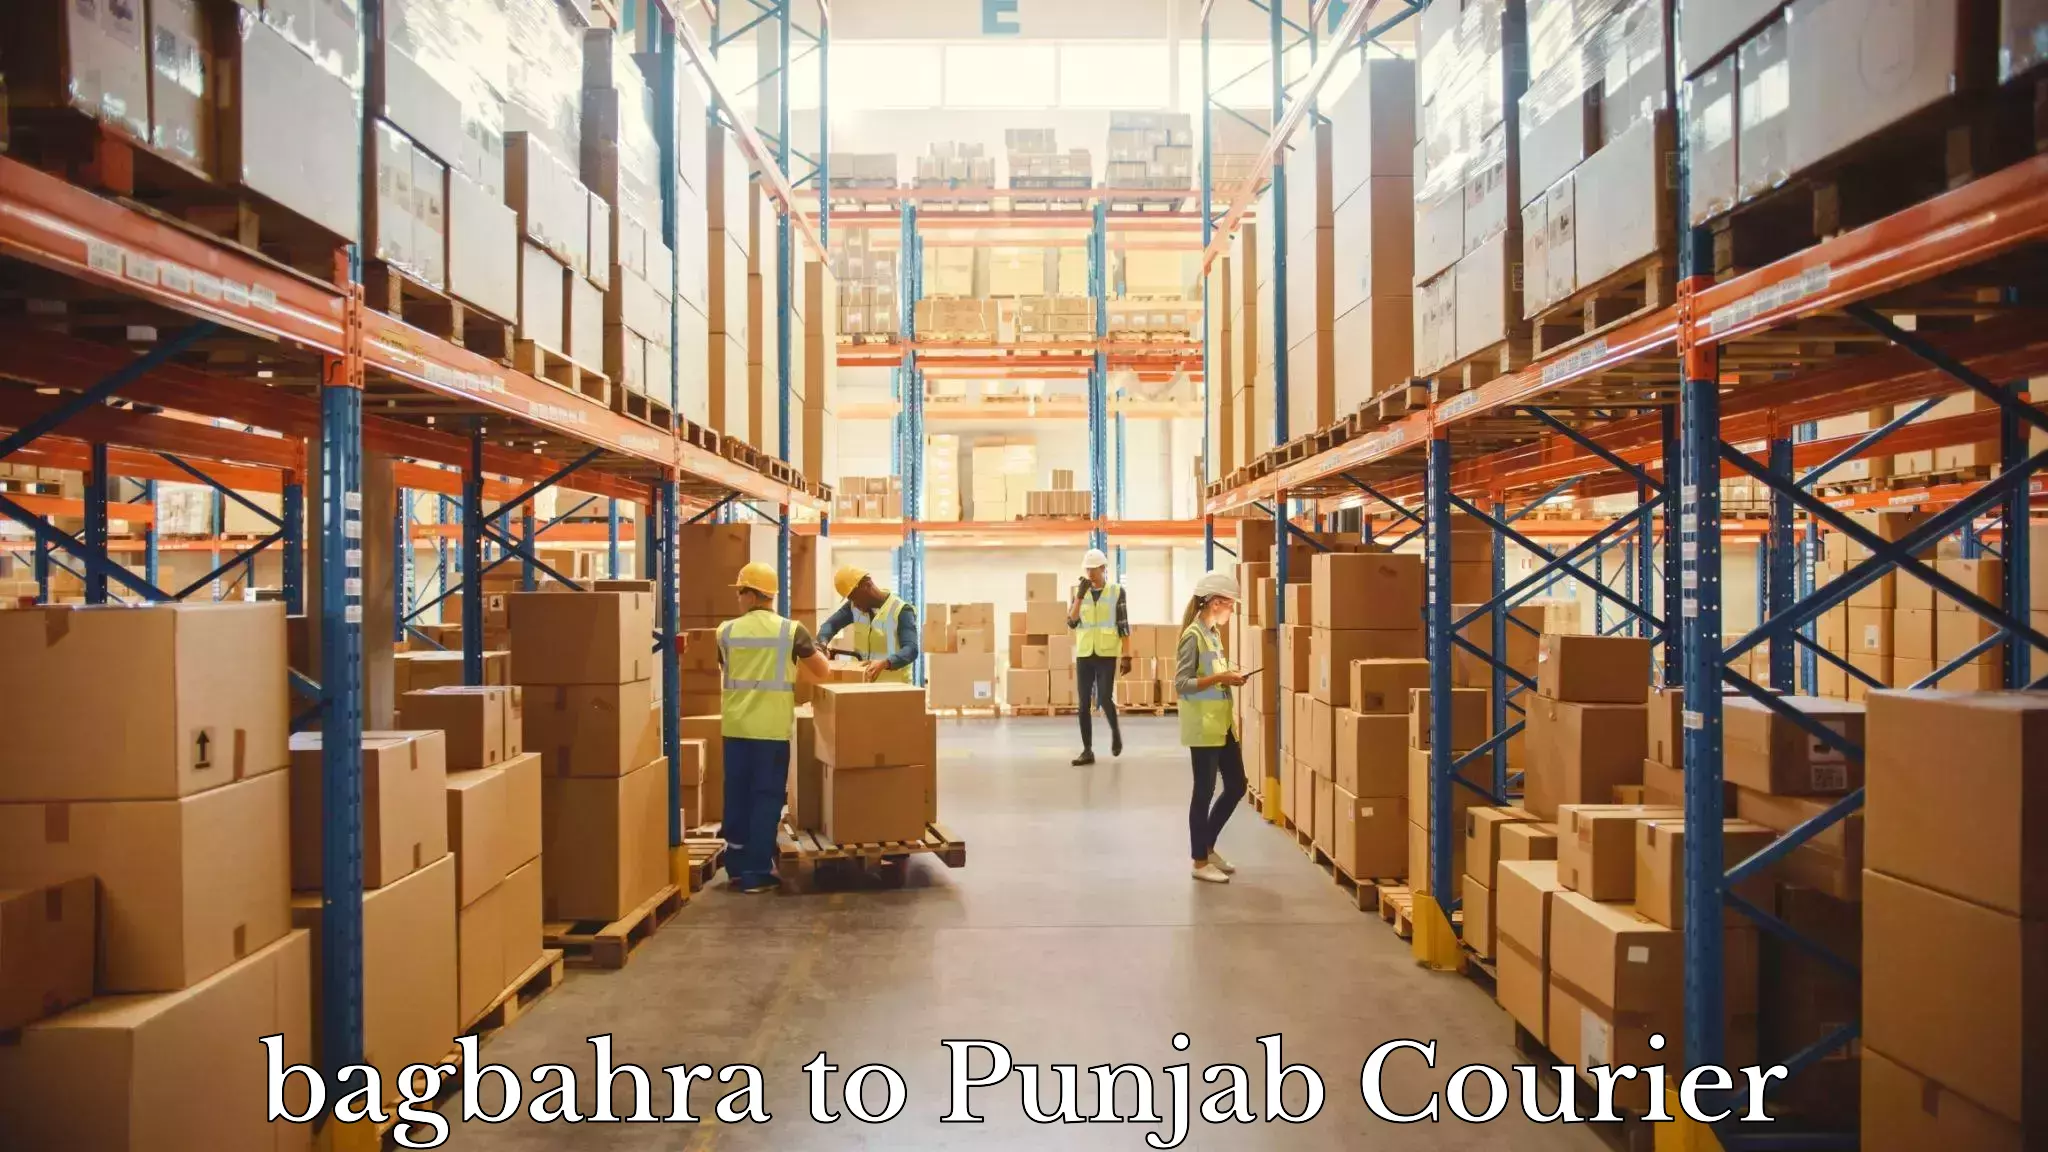 Punctual parcel services in bagbahra to Punjab